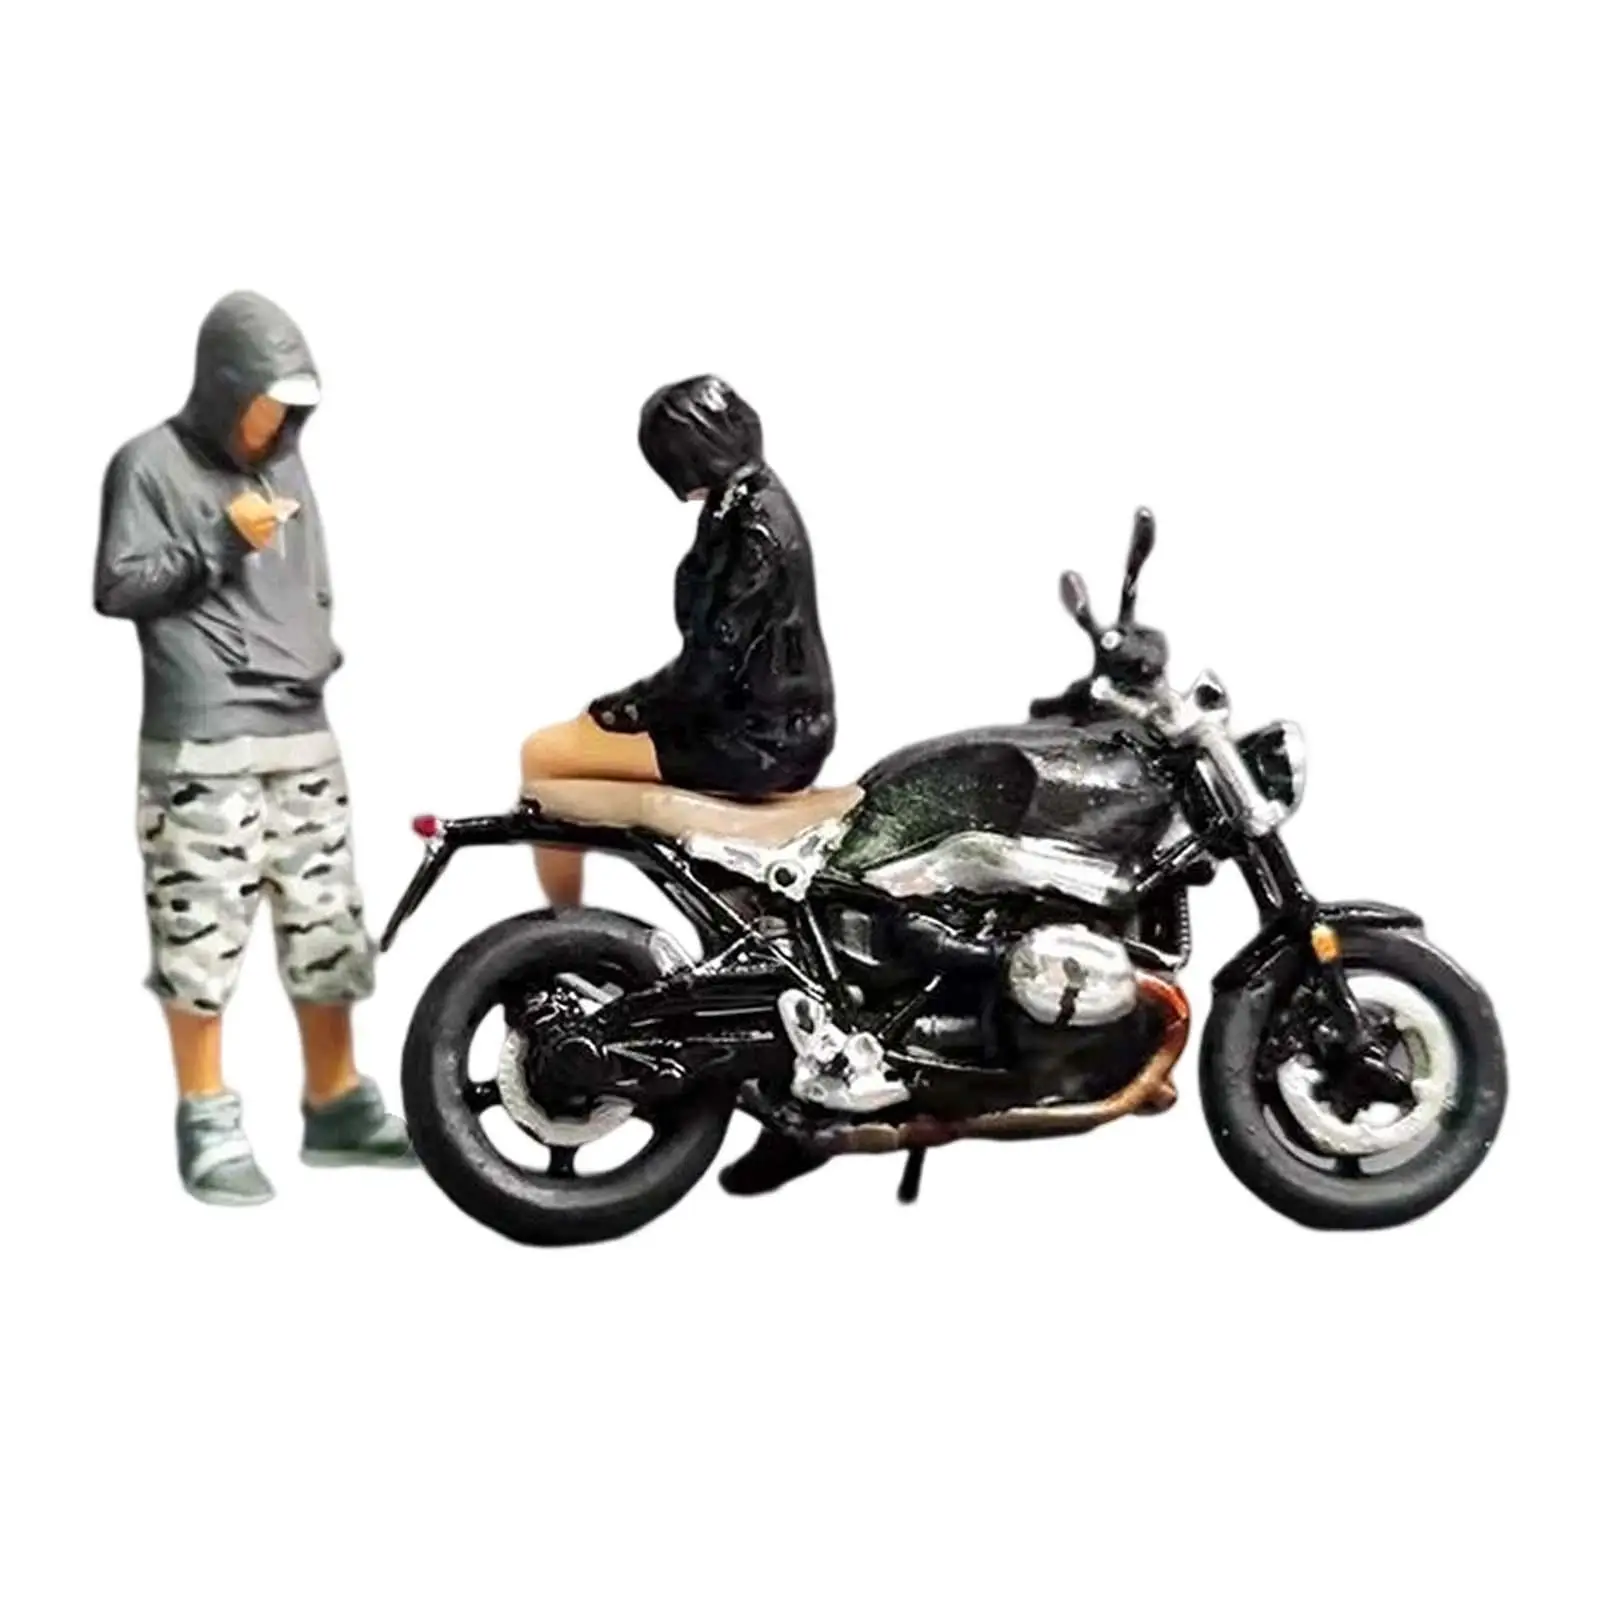 Hand Painted 1:64 Figure Motorcycle Street Scene Collections Layout Architecture Model Micro Landscape Character Model Toy